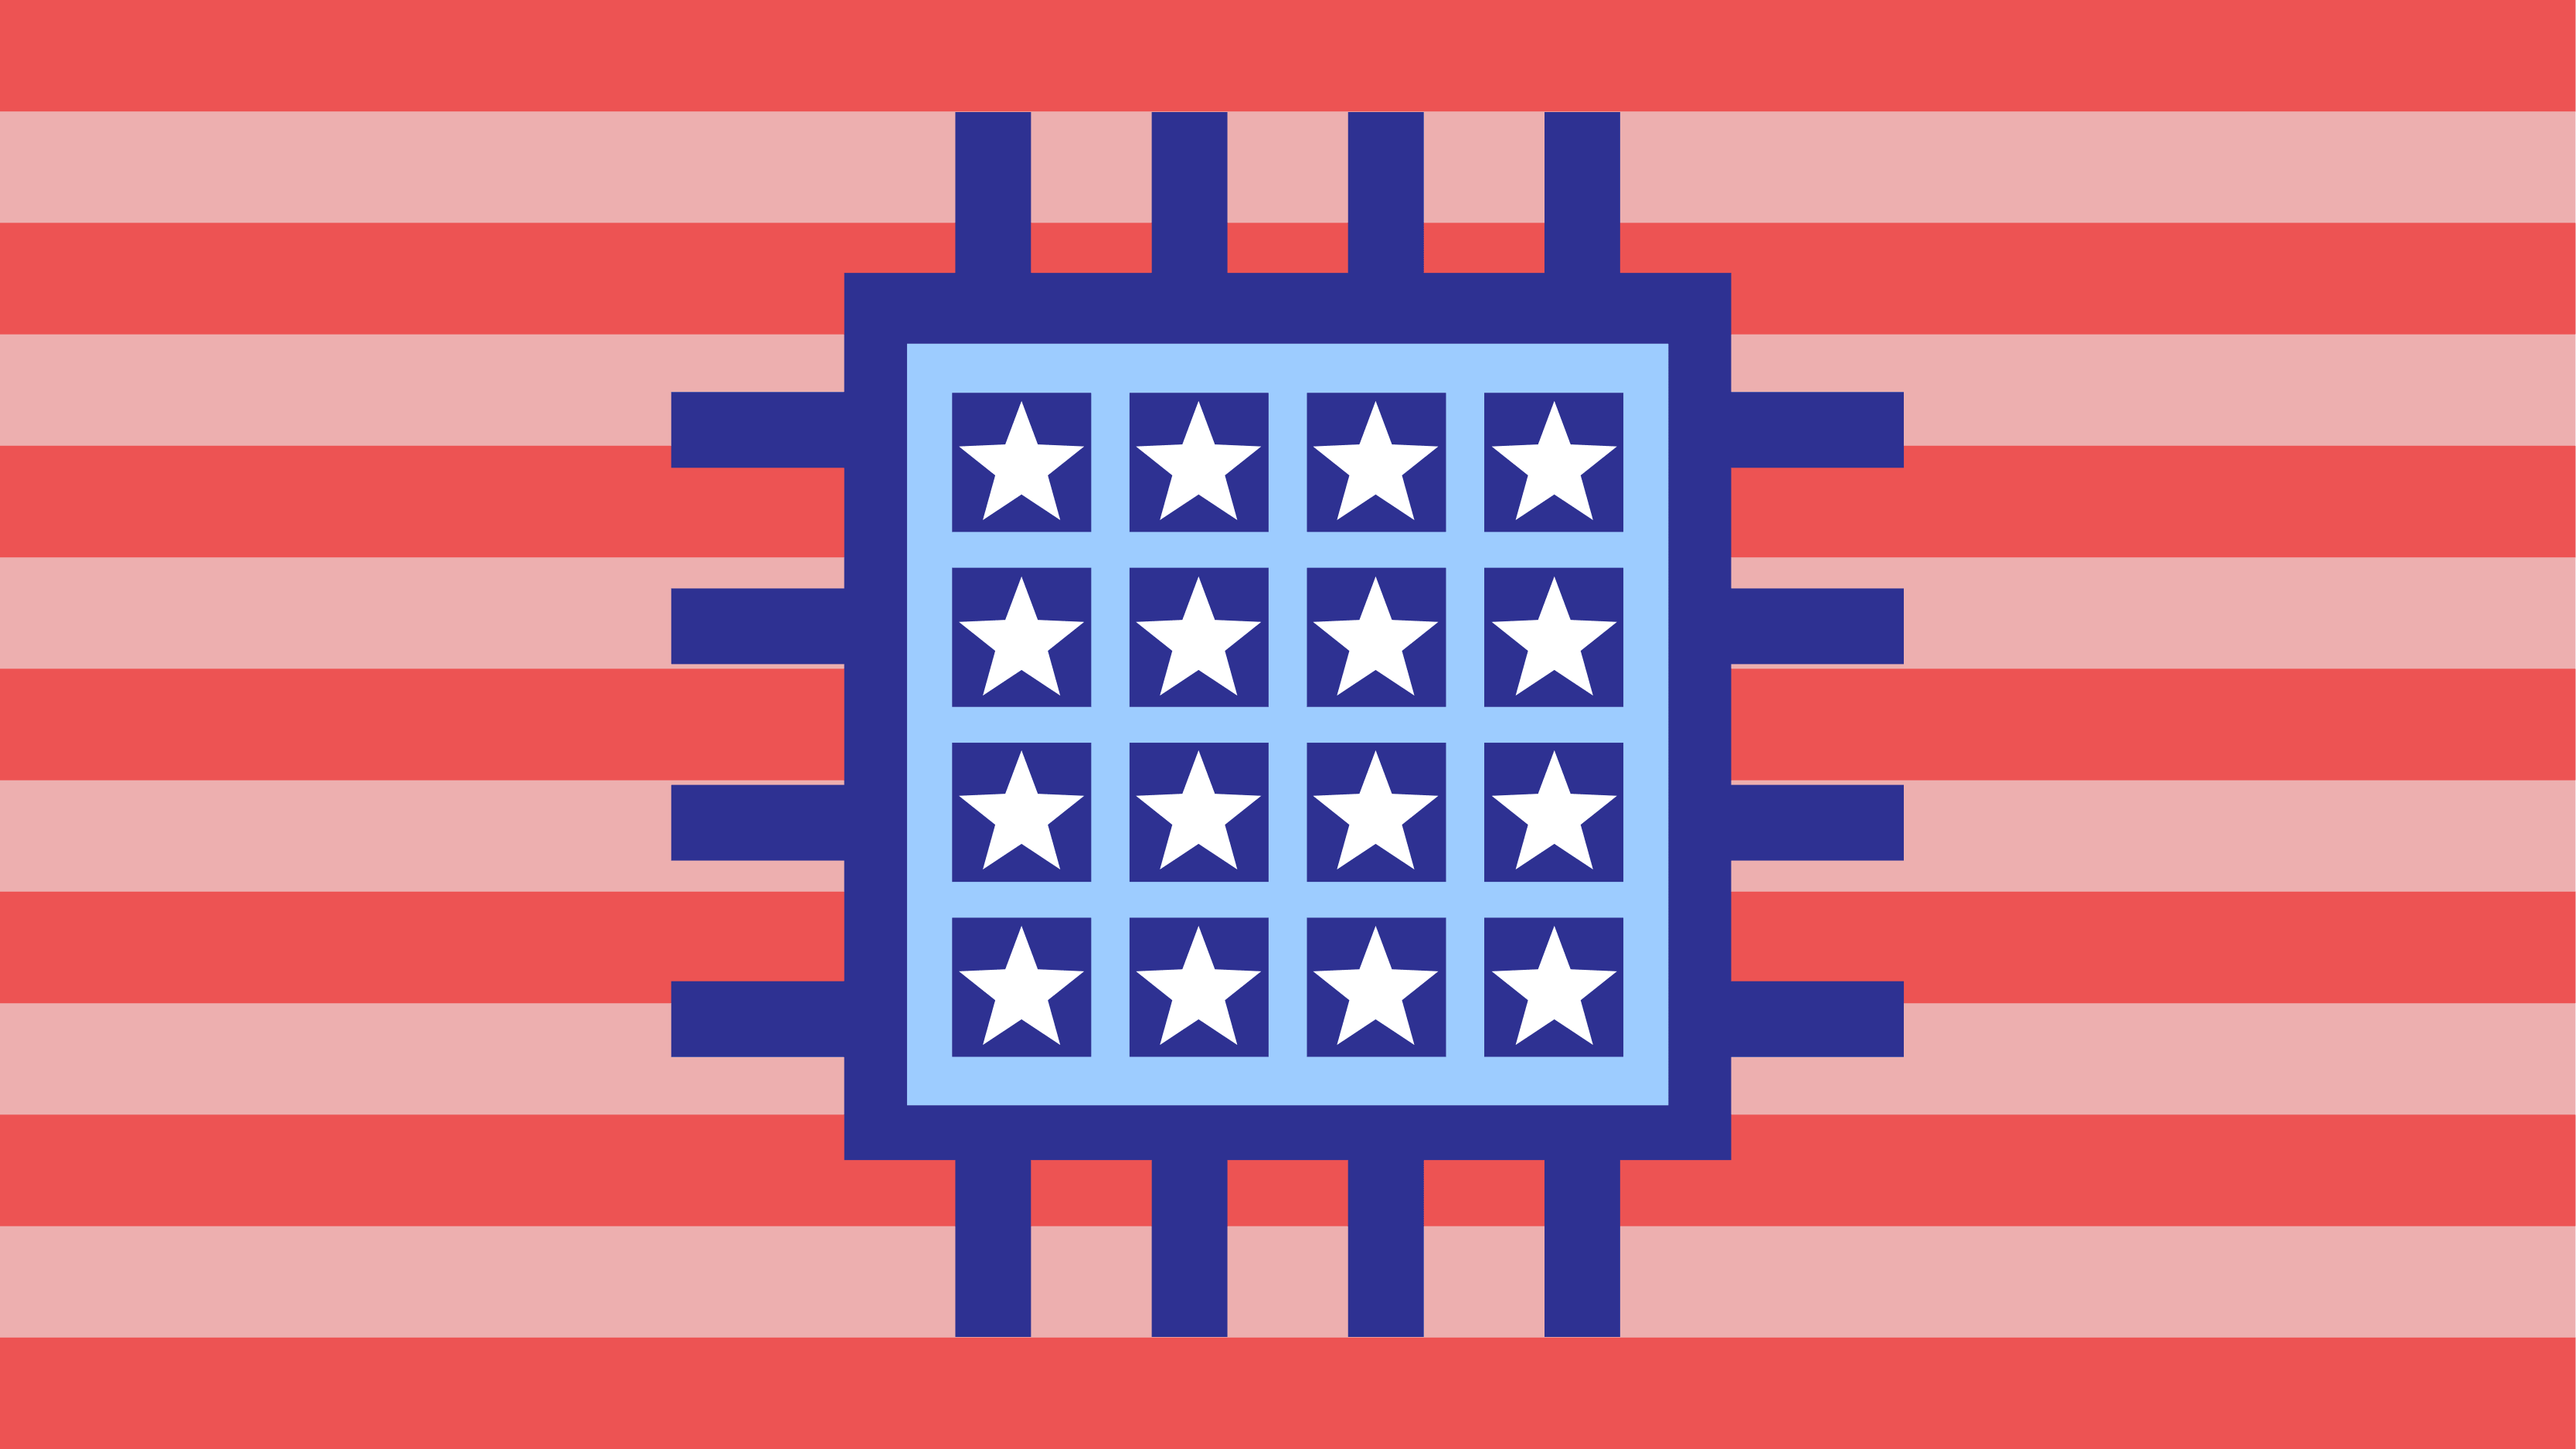 Illustration of red-striped pattern under a blue computer chip being filled with white five-point stars.